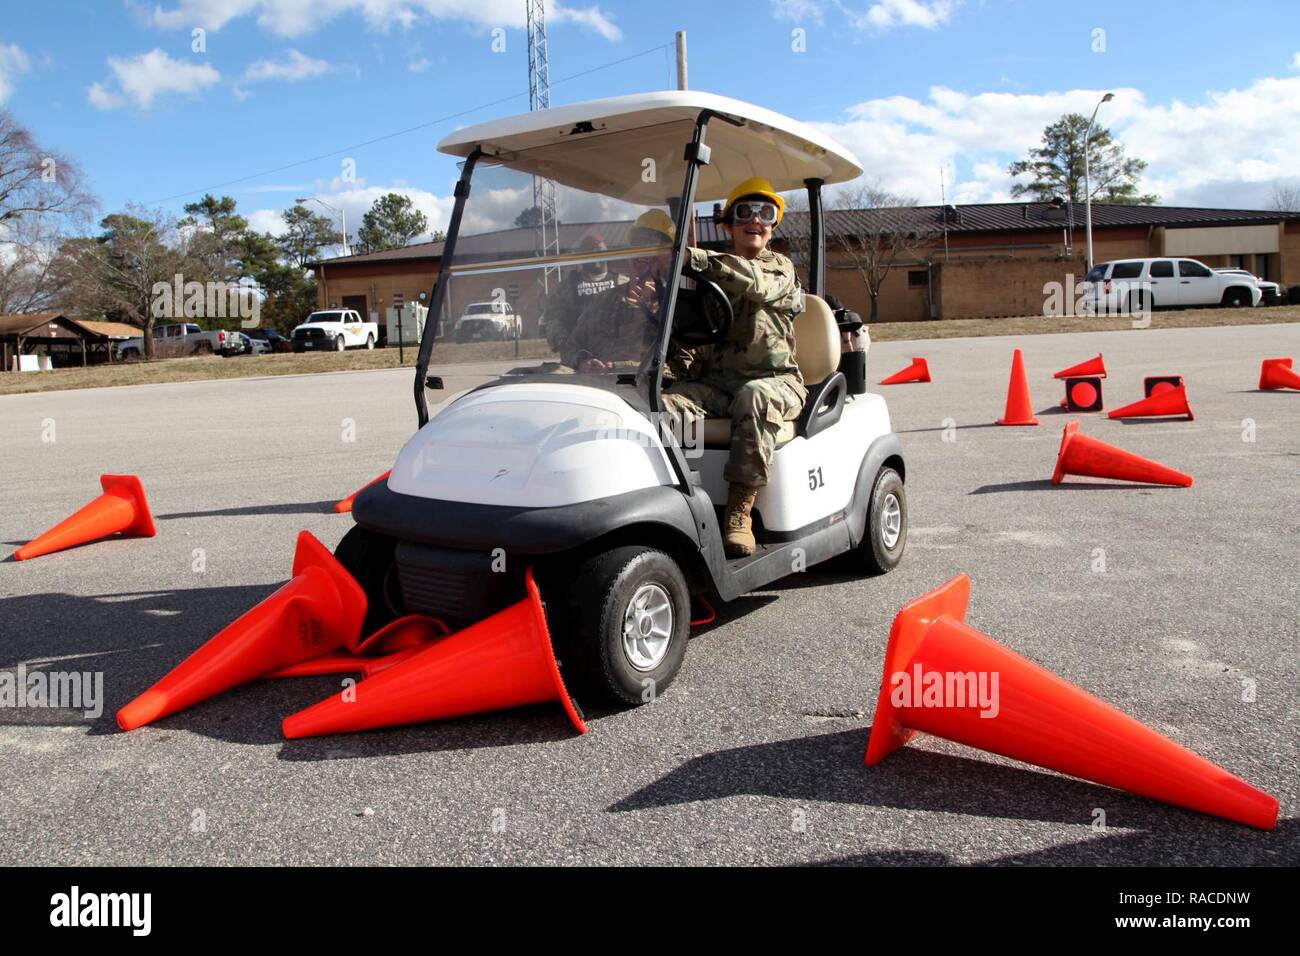 A Soldier, wearing vision distorting “drunk goggles” meant to simulate a blood alcohol content between .08 and .15, grinds a golf cart to a halt, unable to proceed further down a simple cone course, Jan. 12, 2017. The Fort Bragg Provost Marshall Office Traffic Division assisted 7th Military Information Support Battalion, 4th Military Information Support Group, to conduct an alcohol awareness safety class to raise awareness of alcohol’s rapid effects and to deter drunken driving. Stock Photo